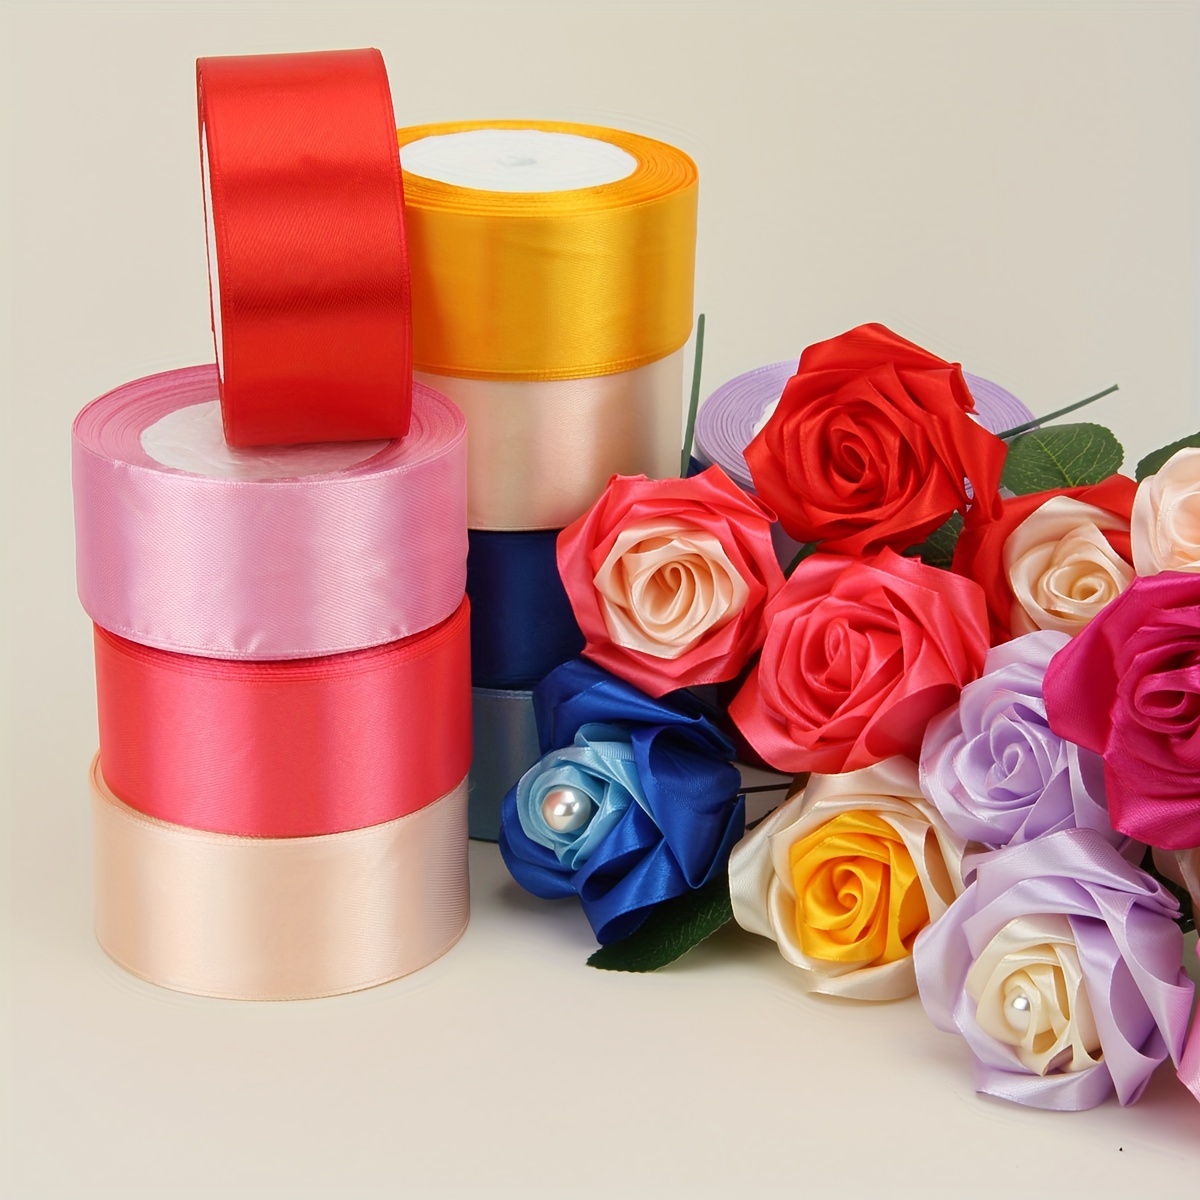 2pcs, Ribbon 866.14 Inch Handmade Valentine's Day Rose Flower Material  Satin Ribbon Flower Gift Packaging Holiday Party Decoration Ribbon, Ribbons  For